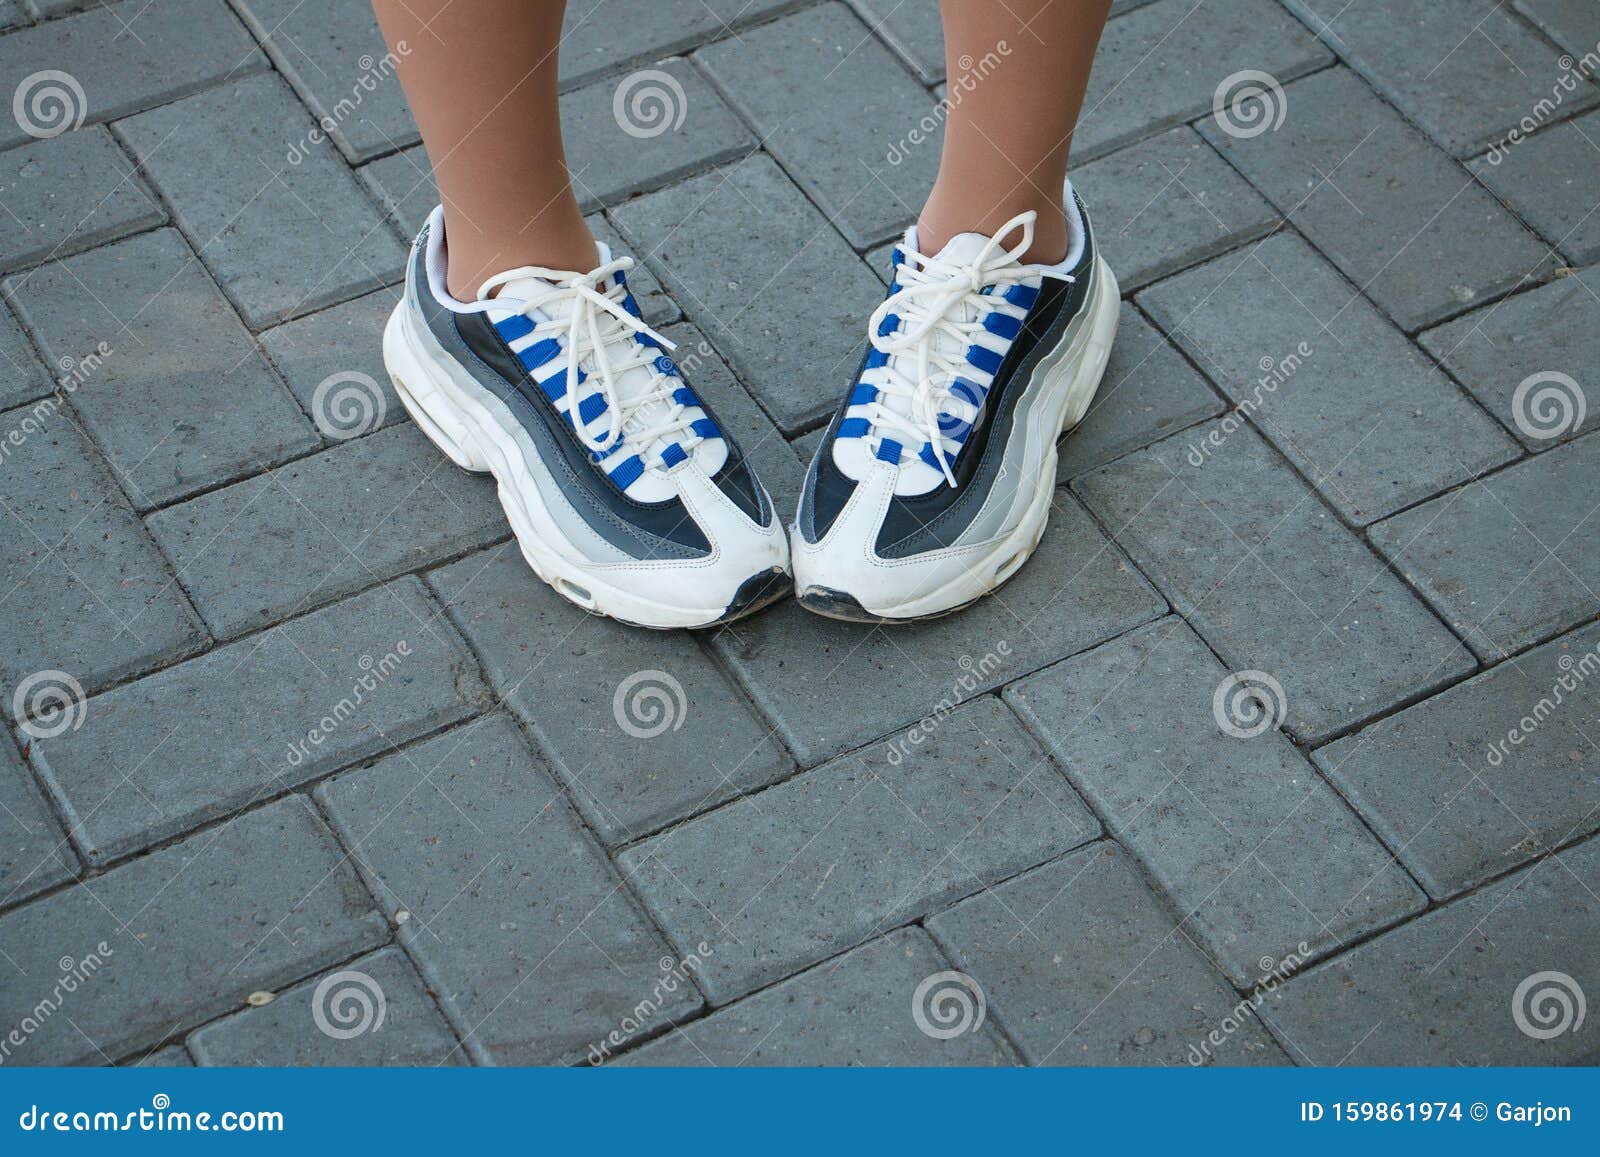 Girl`s Feet in Sports Shoes Stock Photo - Image of girl, active: 159861974